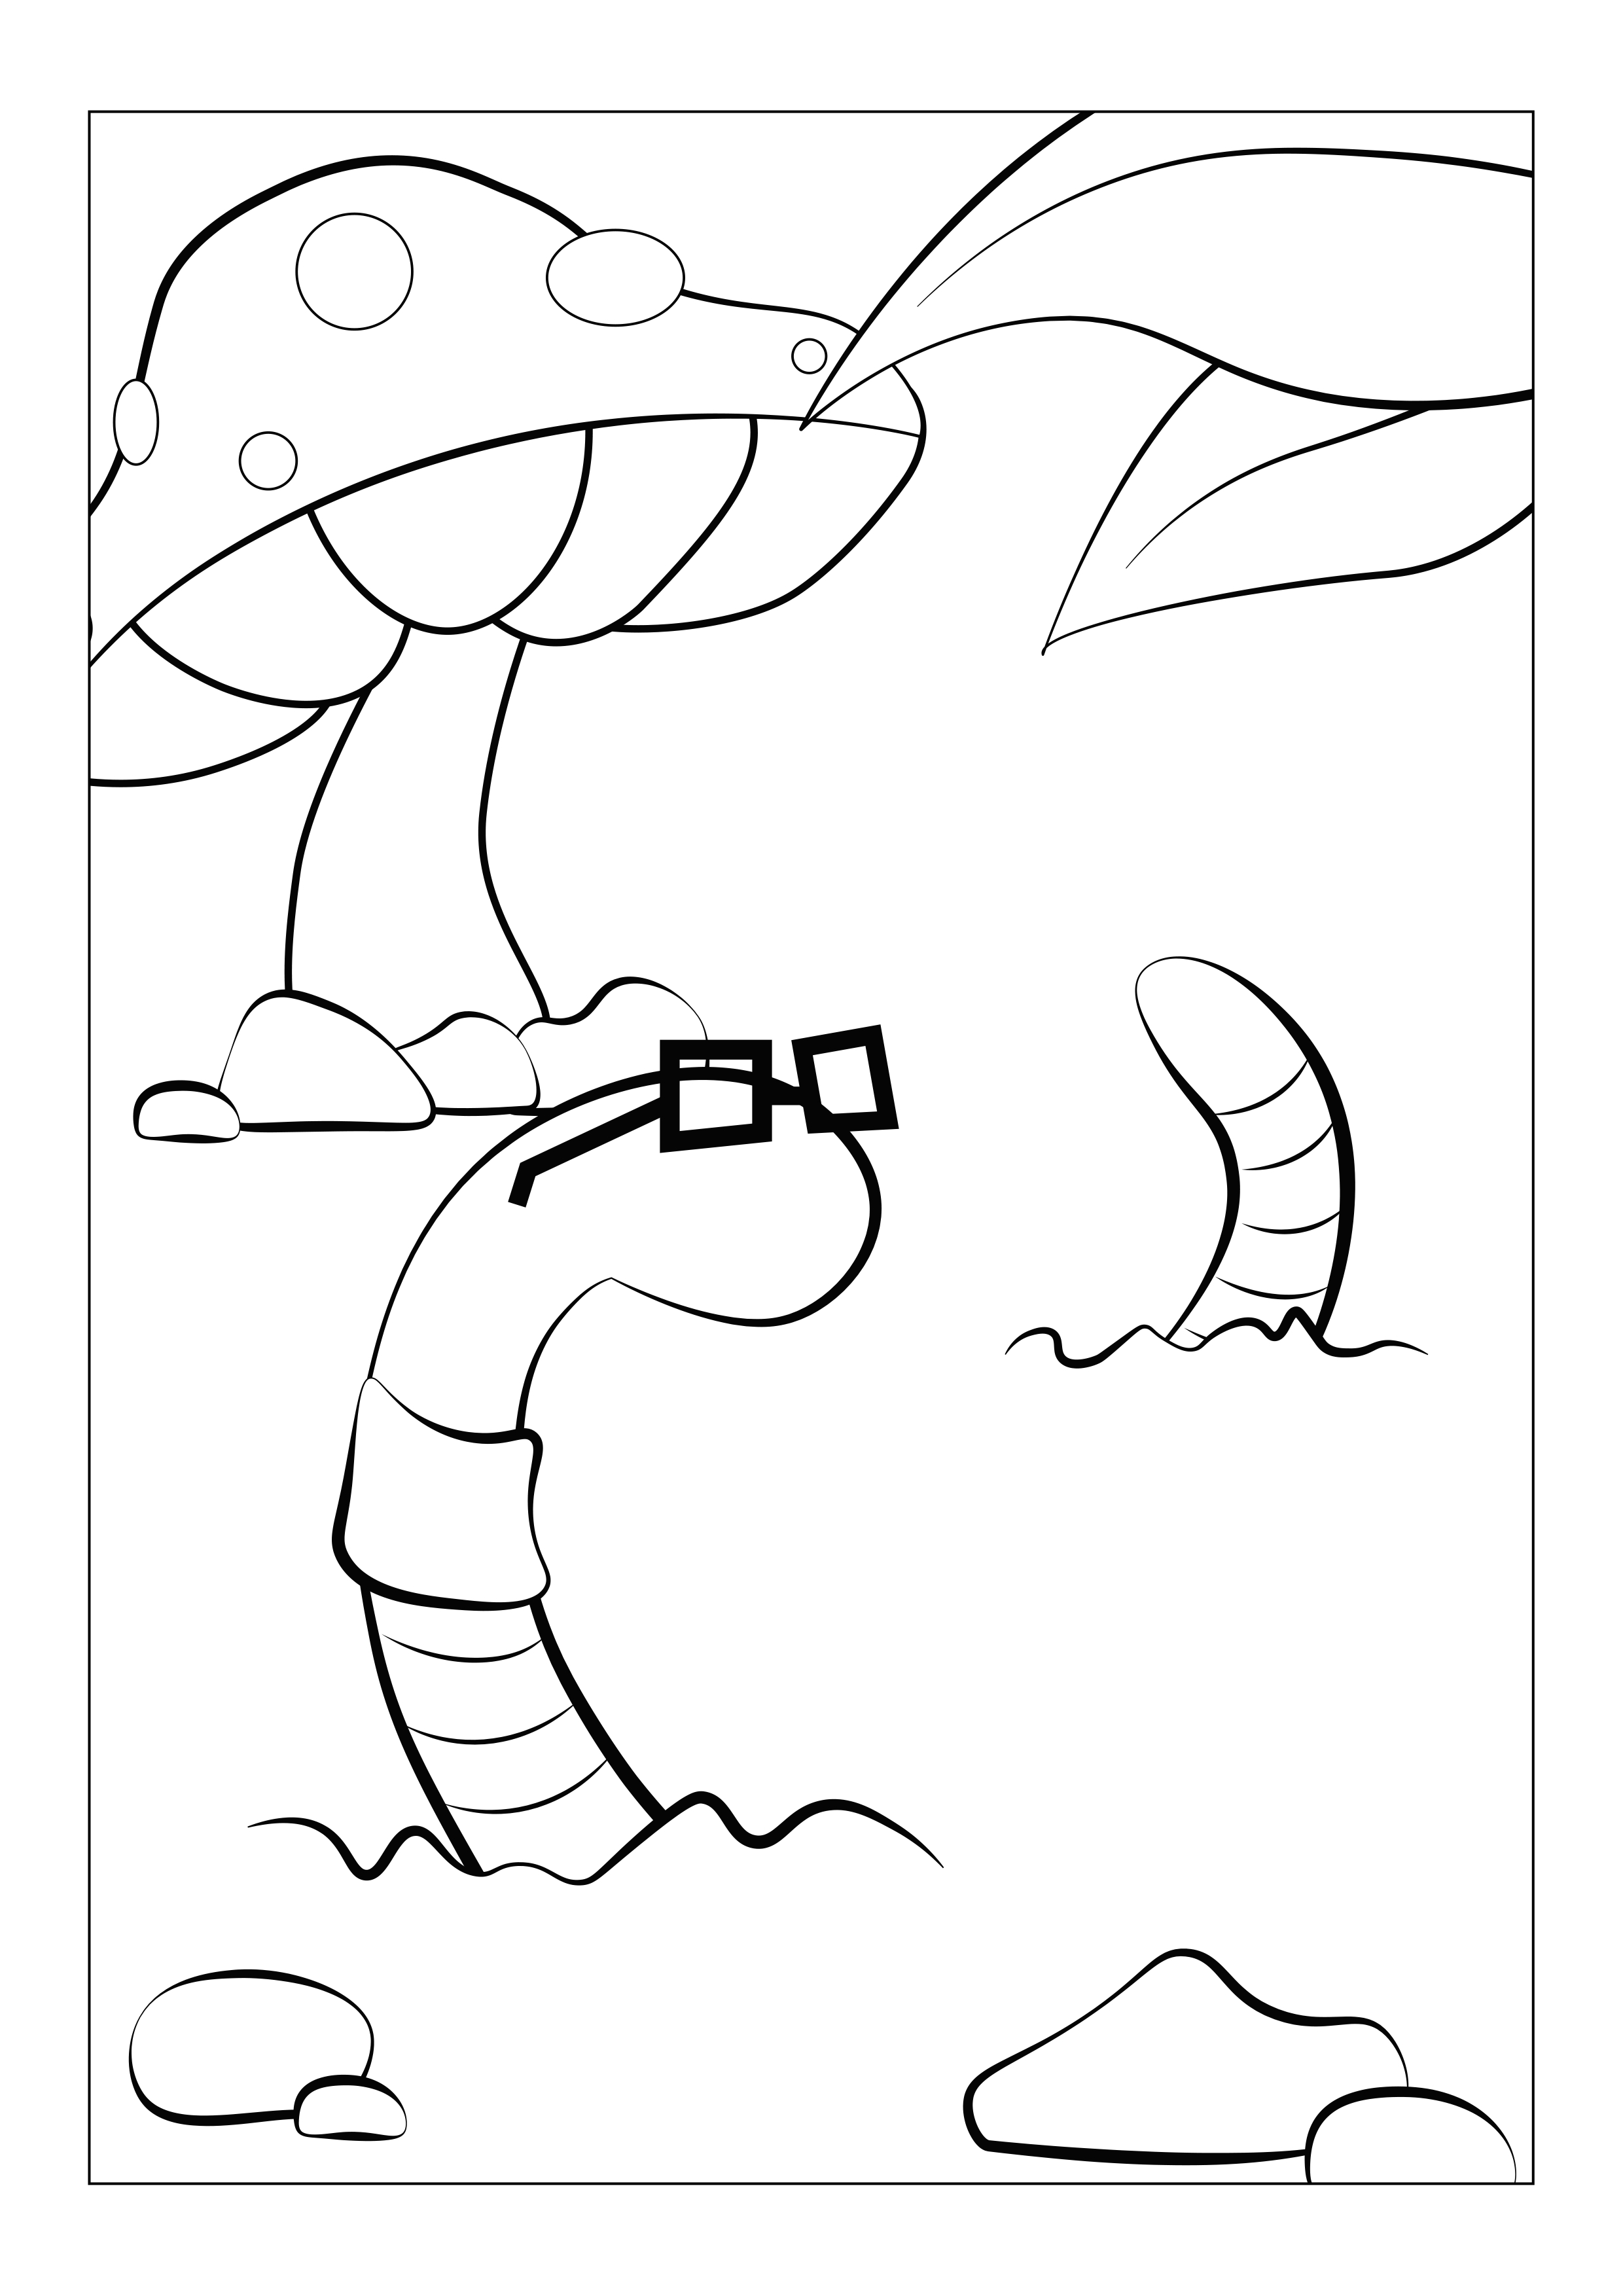 Coloring Pages Online To Print Coloring Ideas Free Online Coloring Pages To Print Ideas Fun Kids